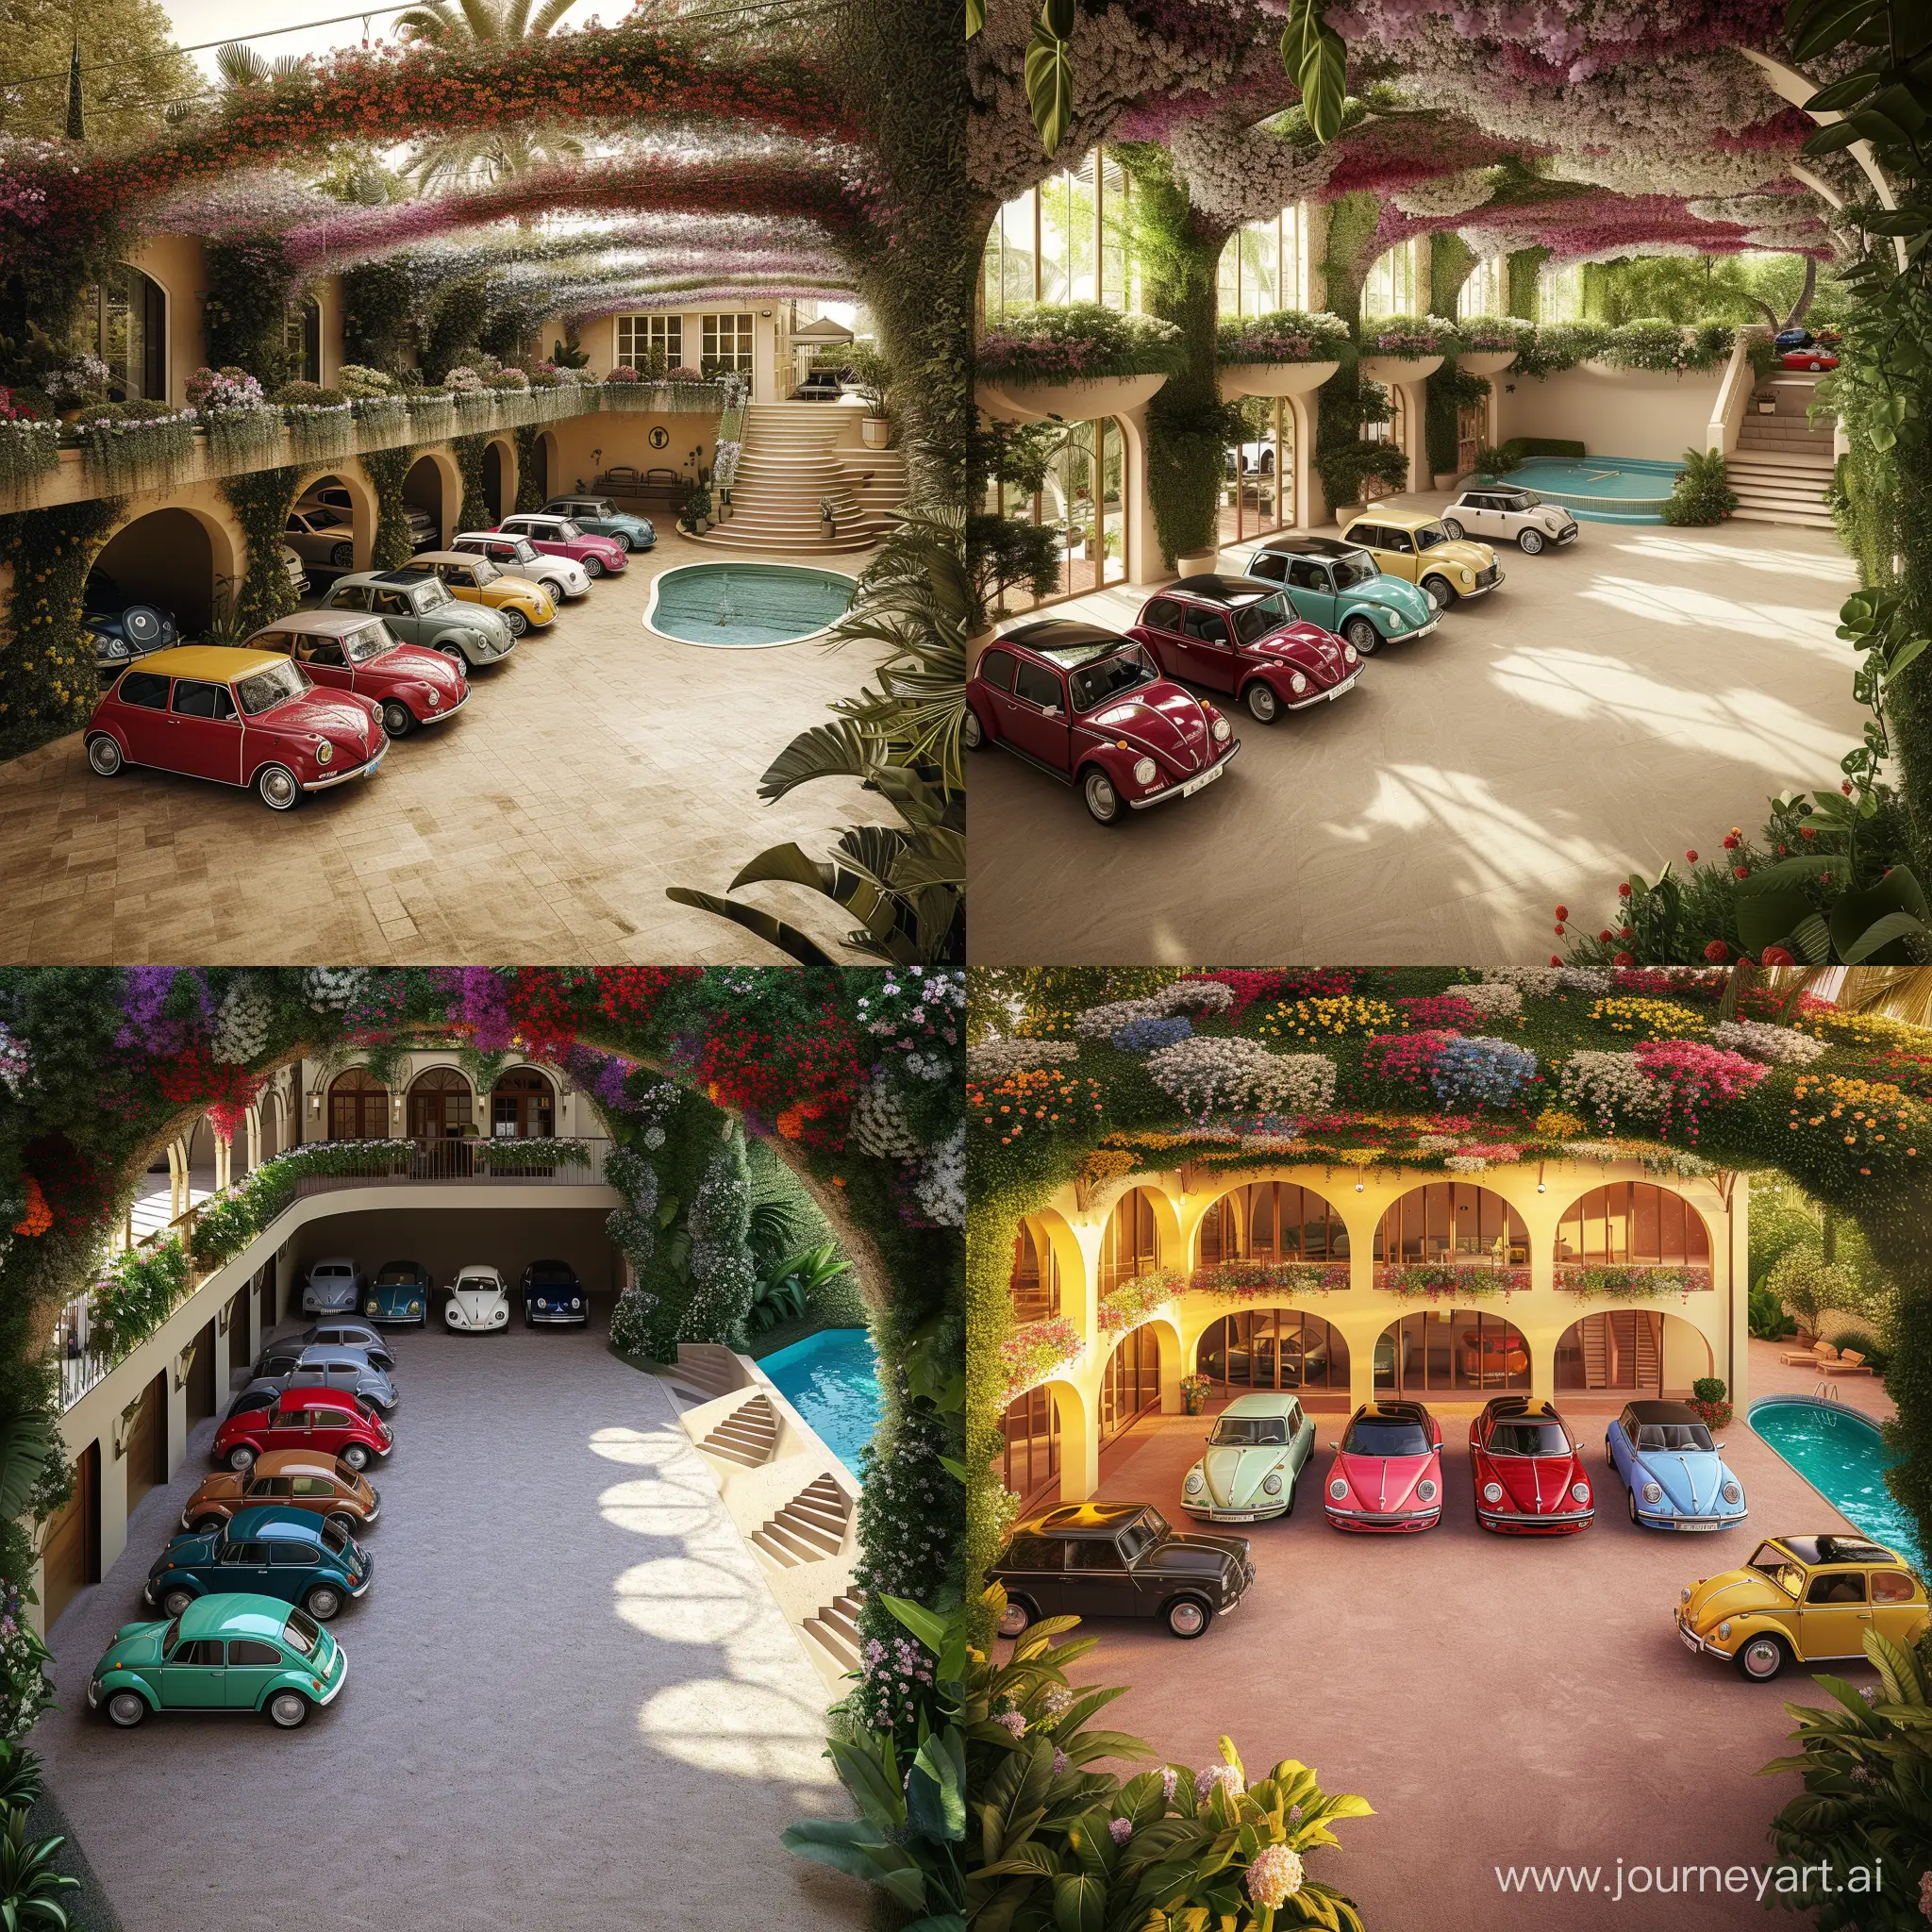 A duplex house with a large yard and a swimming pool and Five car Alfa Romeo Giulietta, Mini Cooper, Beetle, Fiat 500 and Volkswagen cars in a row in the parking lot in a parking  roof covered with flowers and plants On the right side and at the entrance to the courtyard
In the continuation of the path, four semi-circular stairs lead us to the inside of the house
